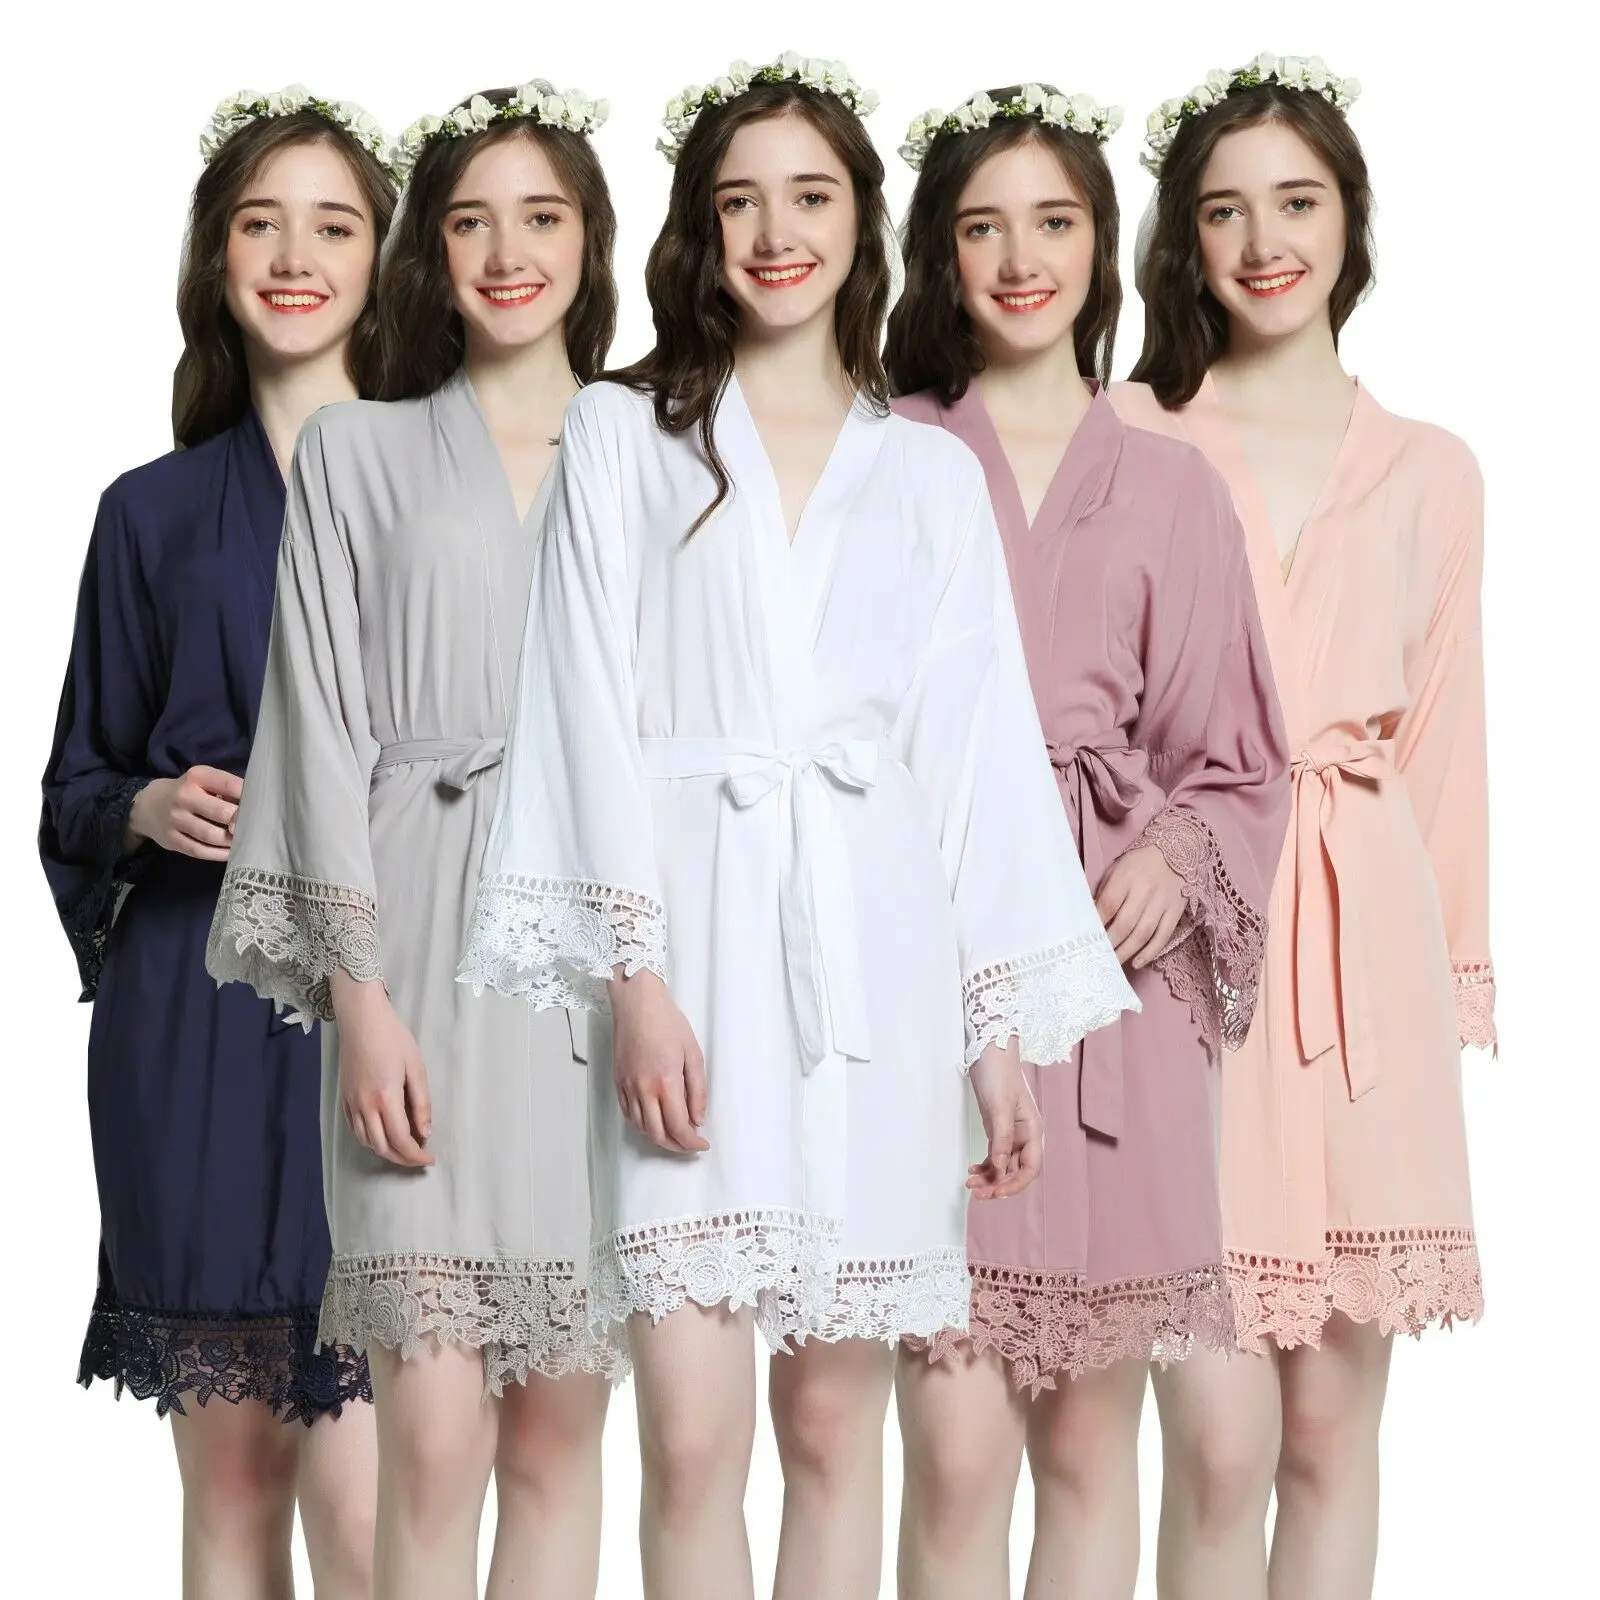 

Rayon Cotton lace bridal robes bridesmaid robes bridesmaid robes three-quarter sleeve lace rayon robes can be used as nightgown